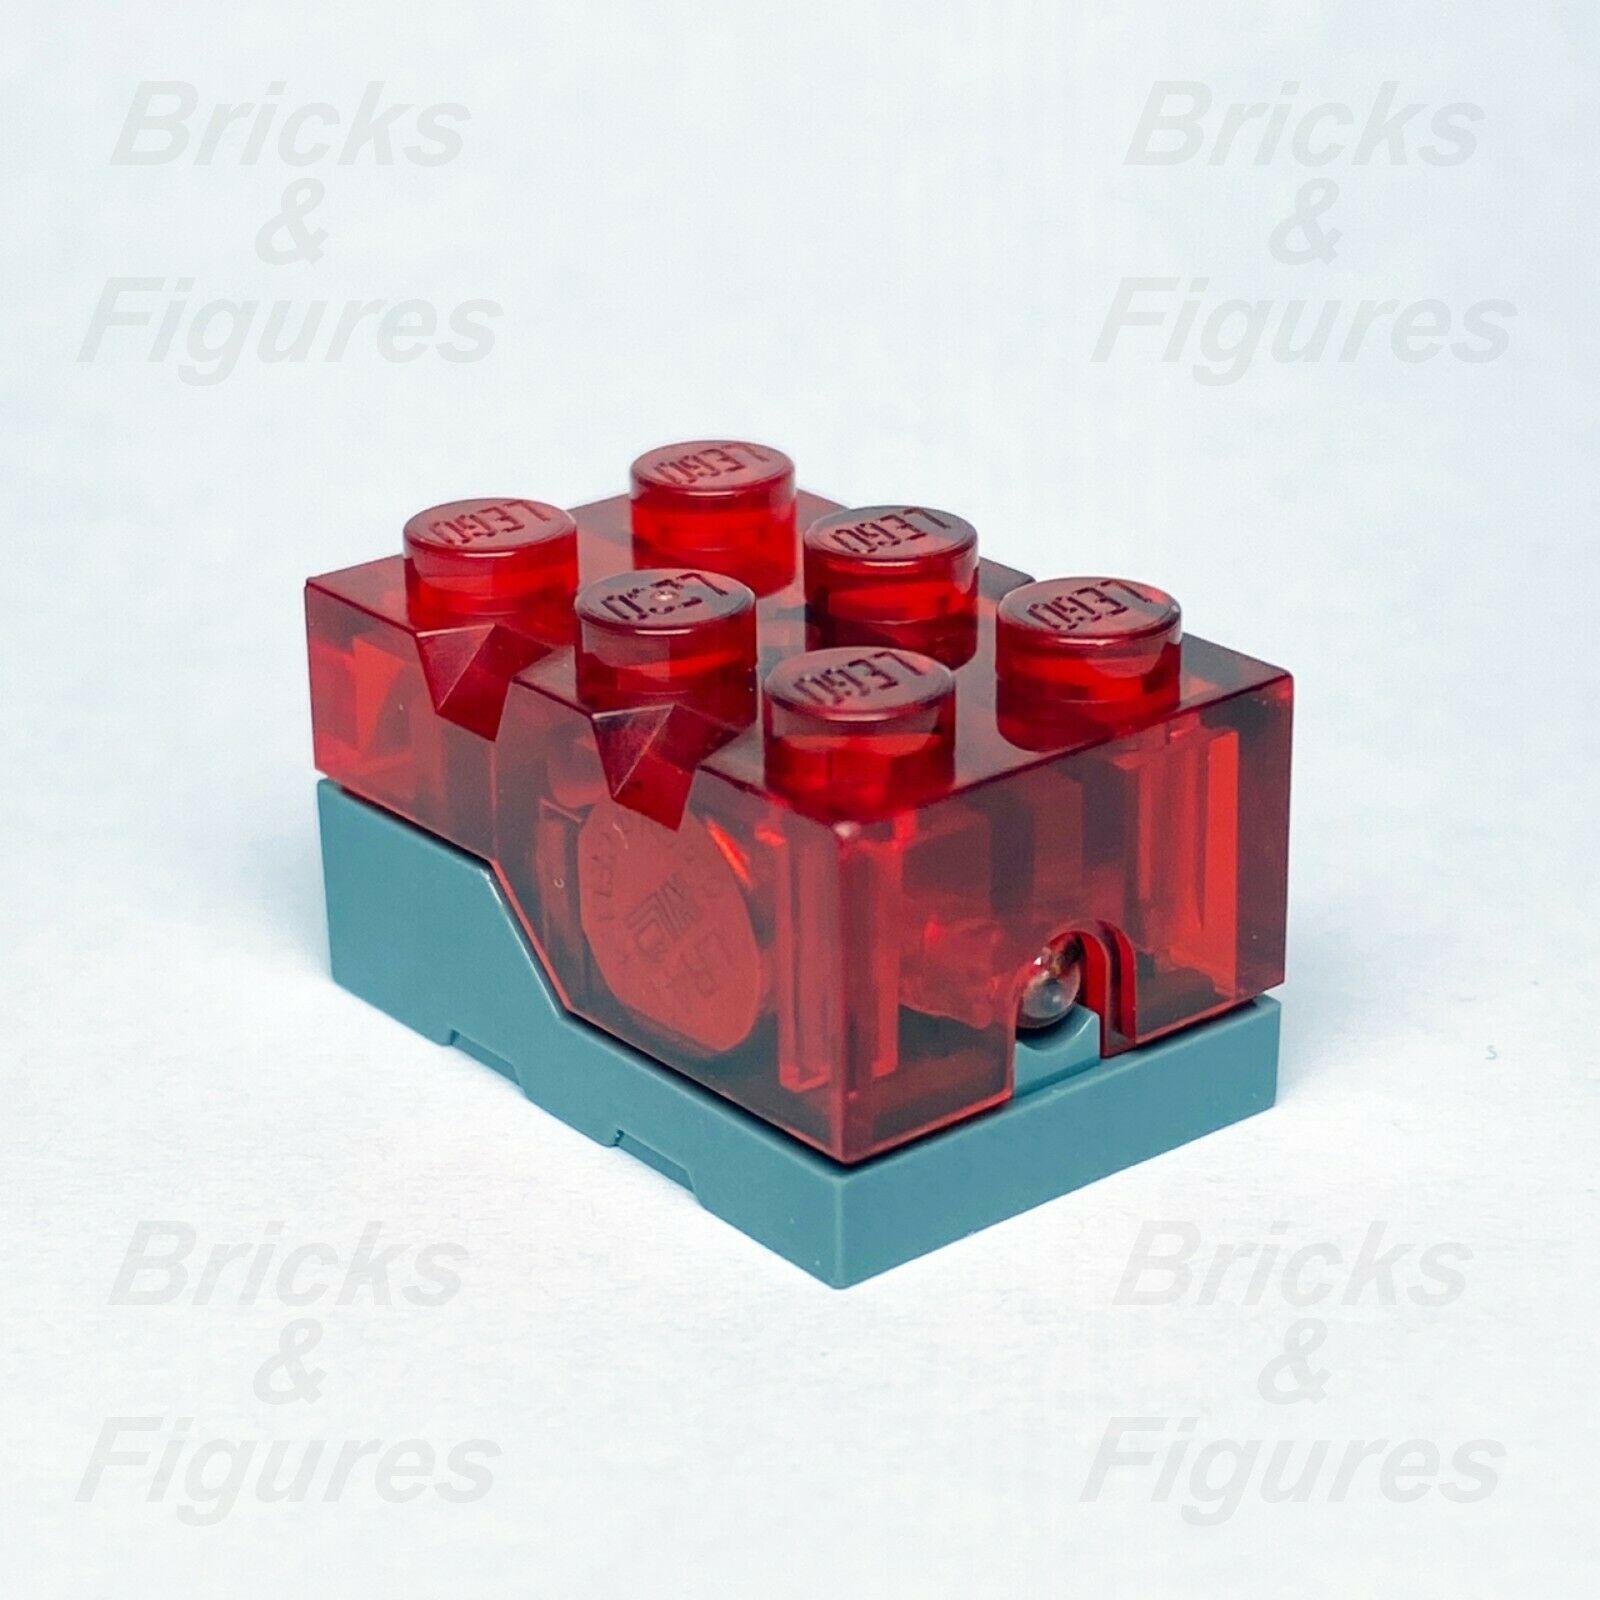 LEGO Trans-Red Top Red LED Glow Electric Light Brick 2 x 3 x 1 1/3 Genuine Part - Bricks & Figures